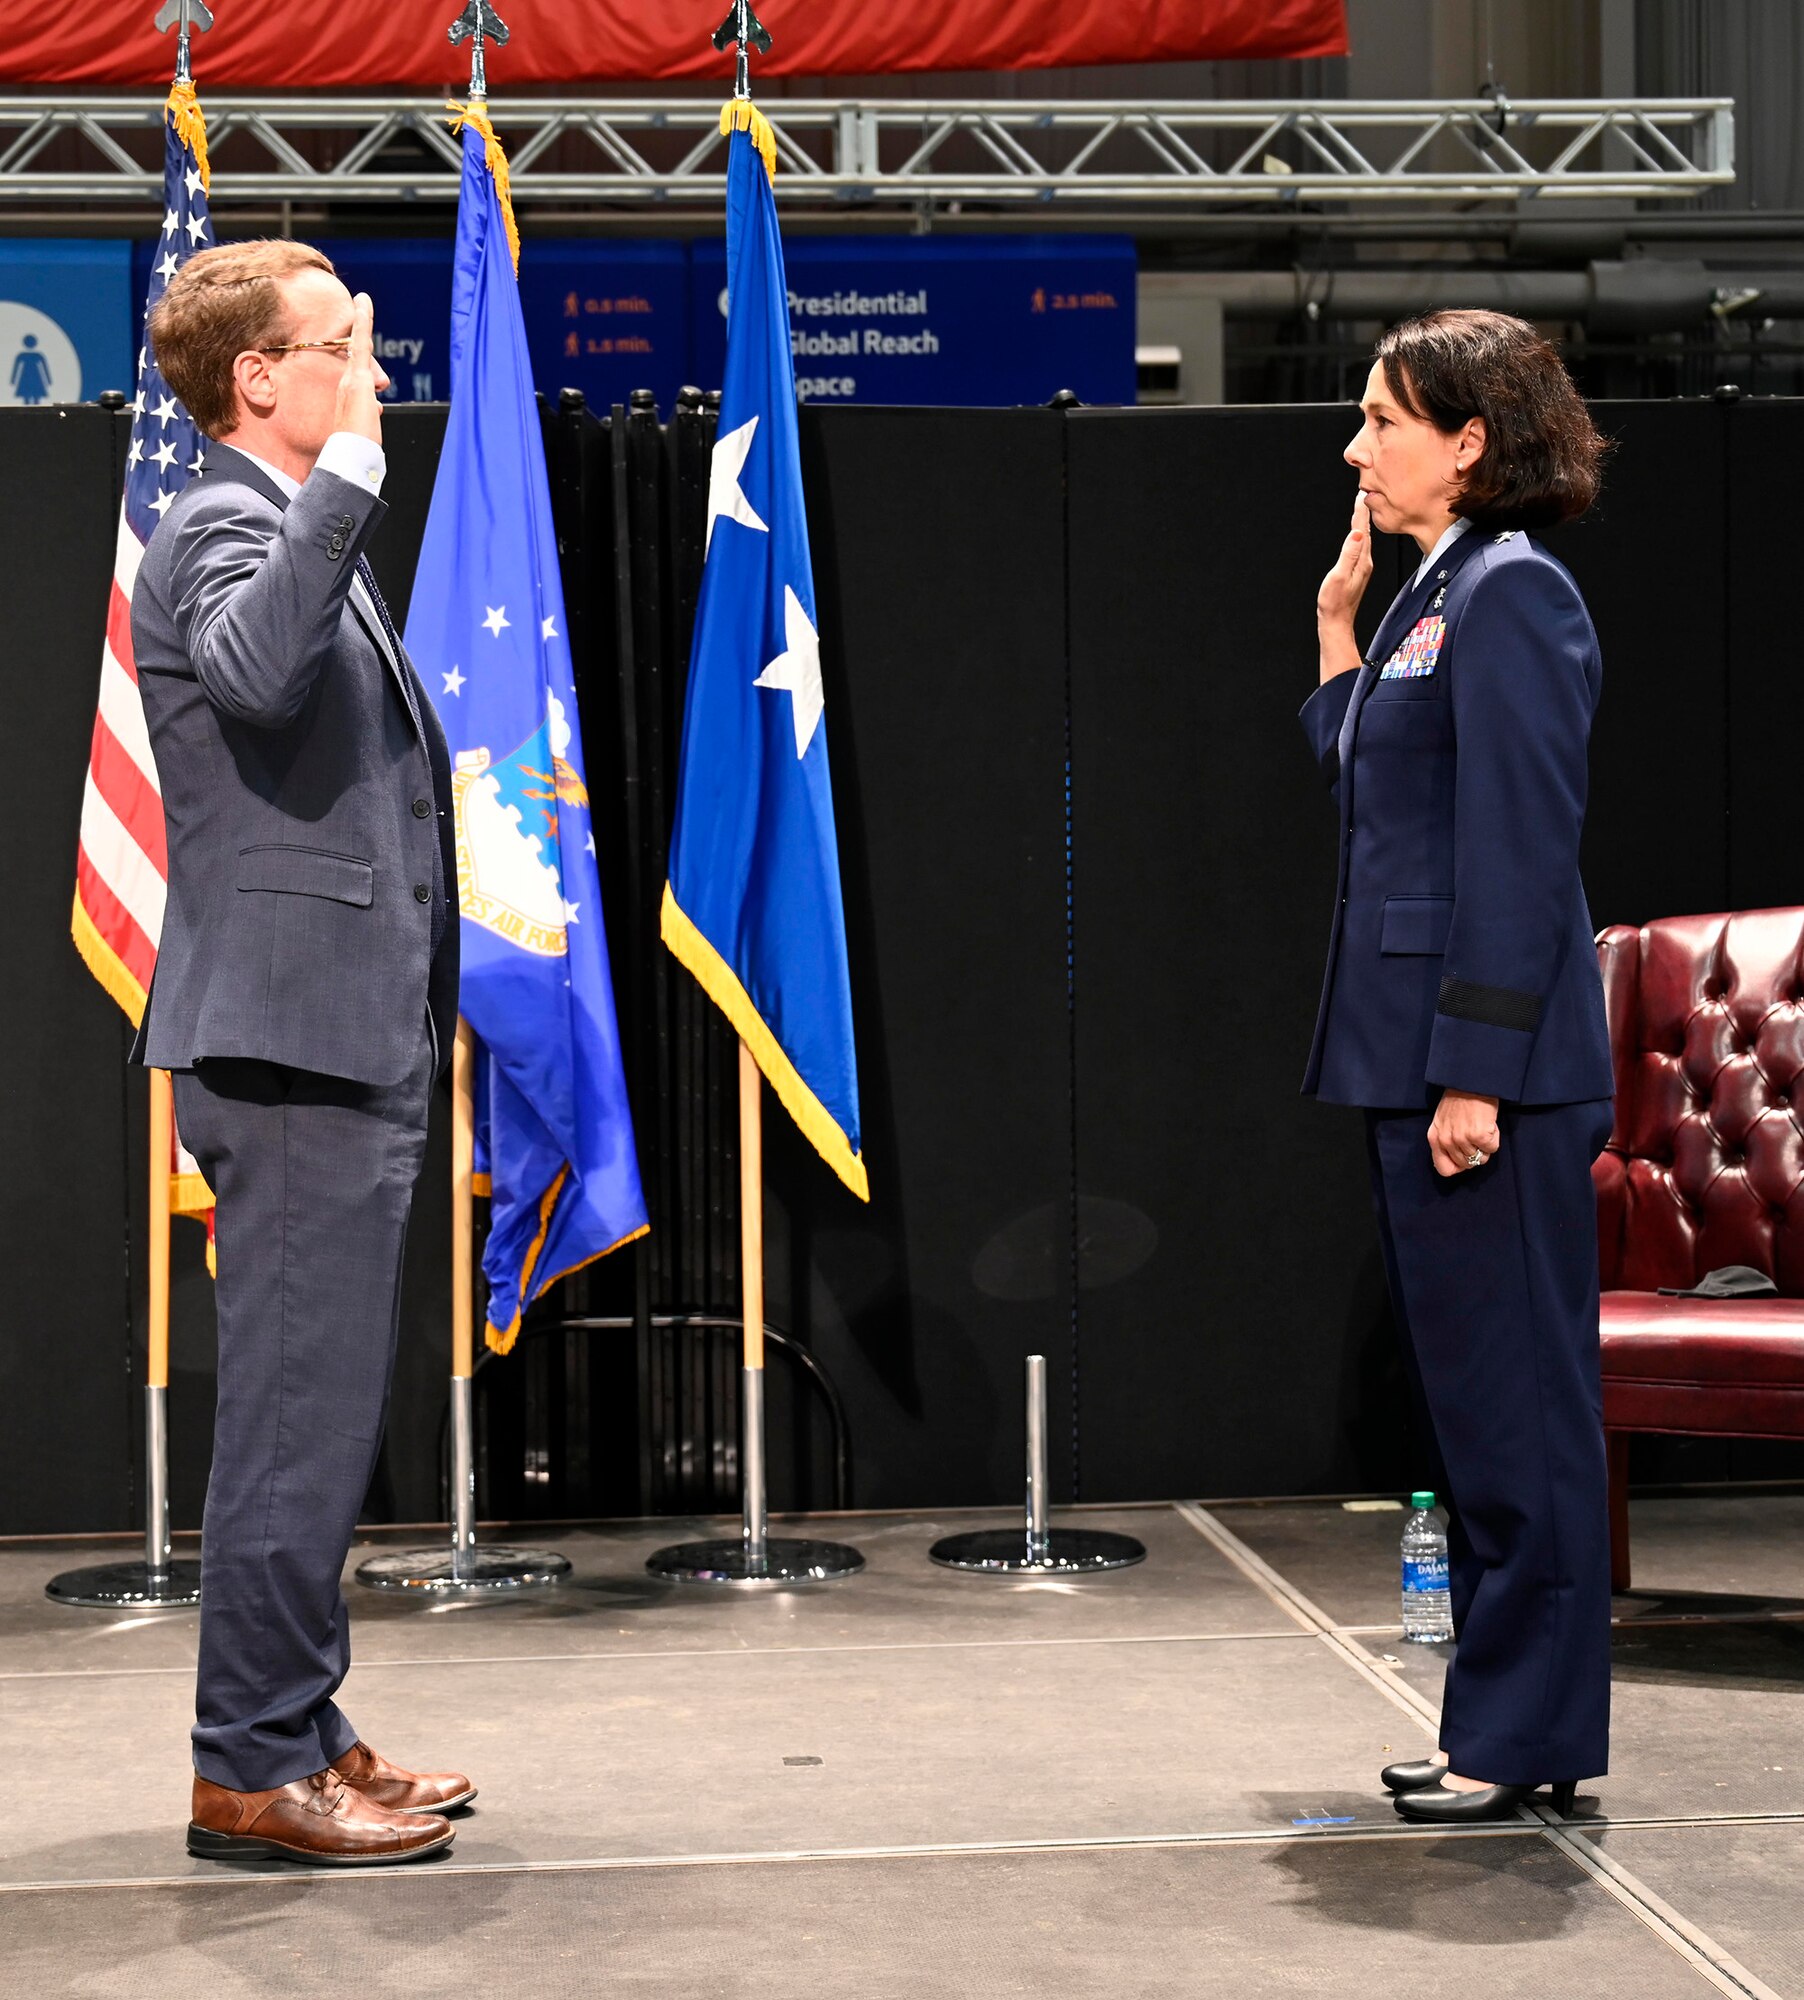 Brig. Gen. Jeannine Ryder swears an oath for the first time as a newly-promoted general officer, Aug. 3 at the National Museum of the United States Air Force, Wright-Patterson Air Force Base, Ohio. (photo by Darrius Parker)